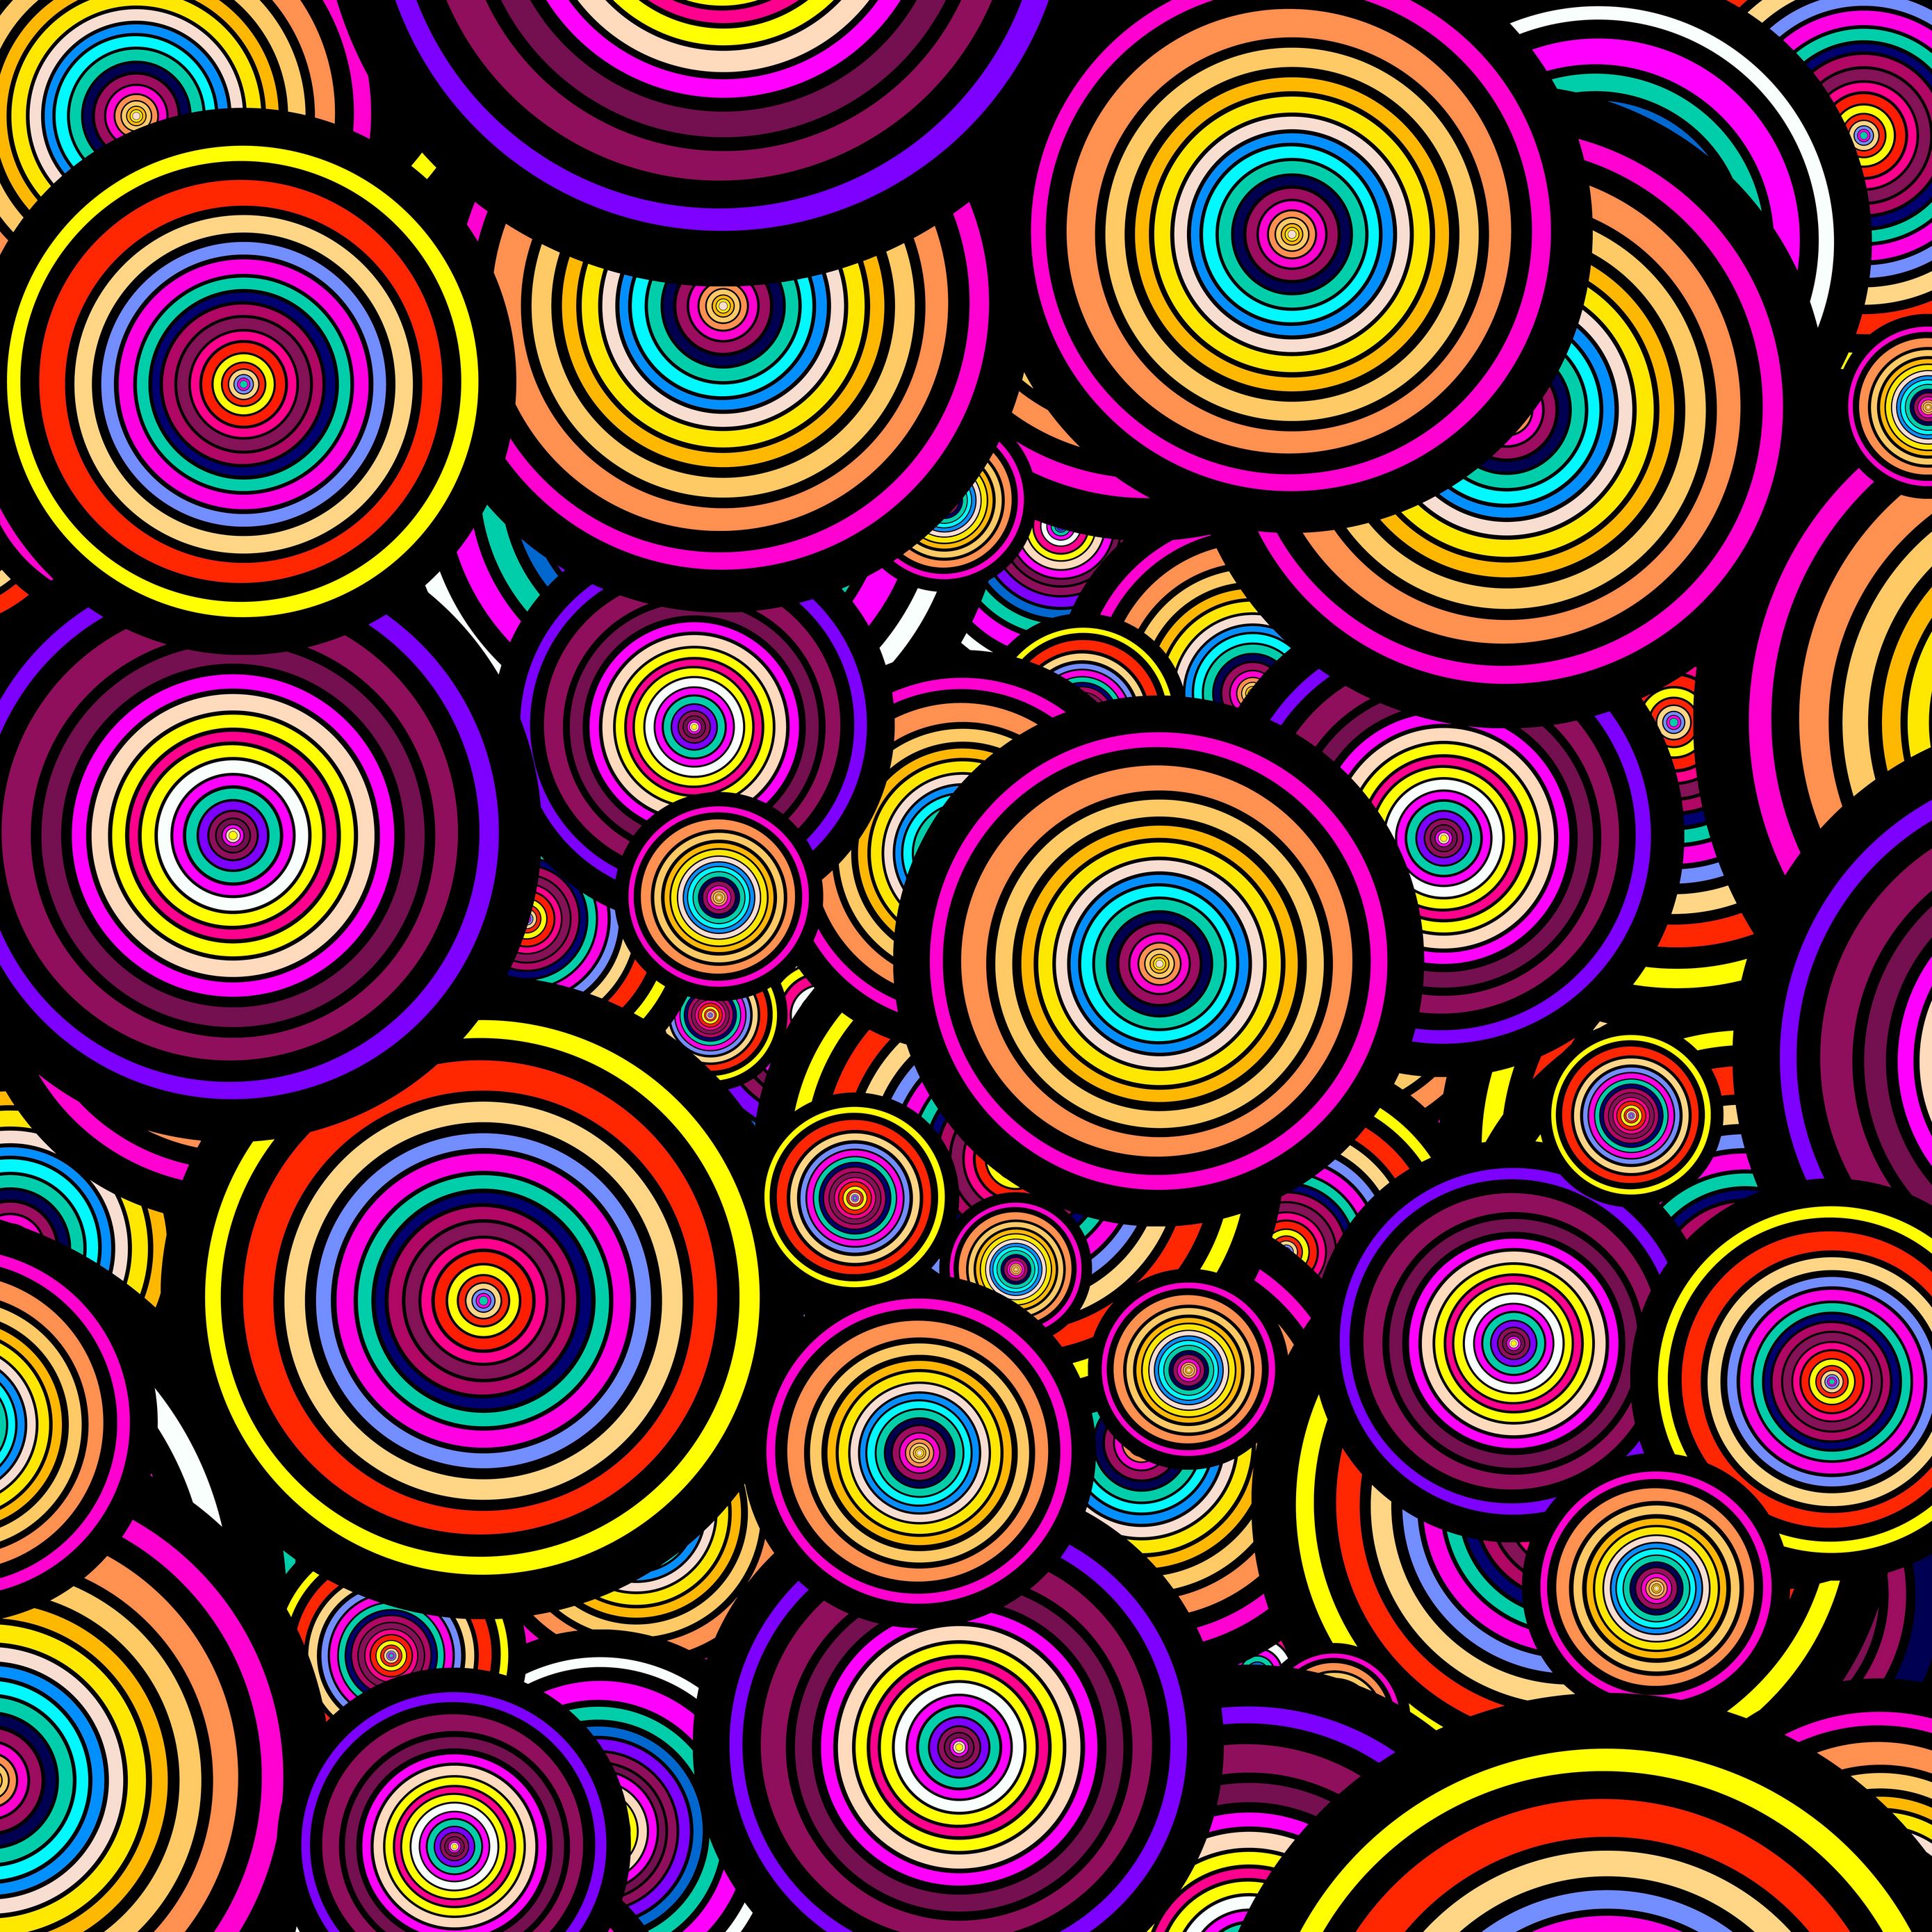 Download wallpaper 2780x2780 circles, shapes, pattern, colorful ...